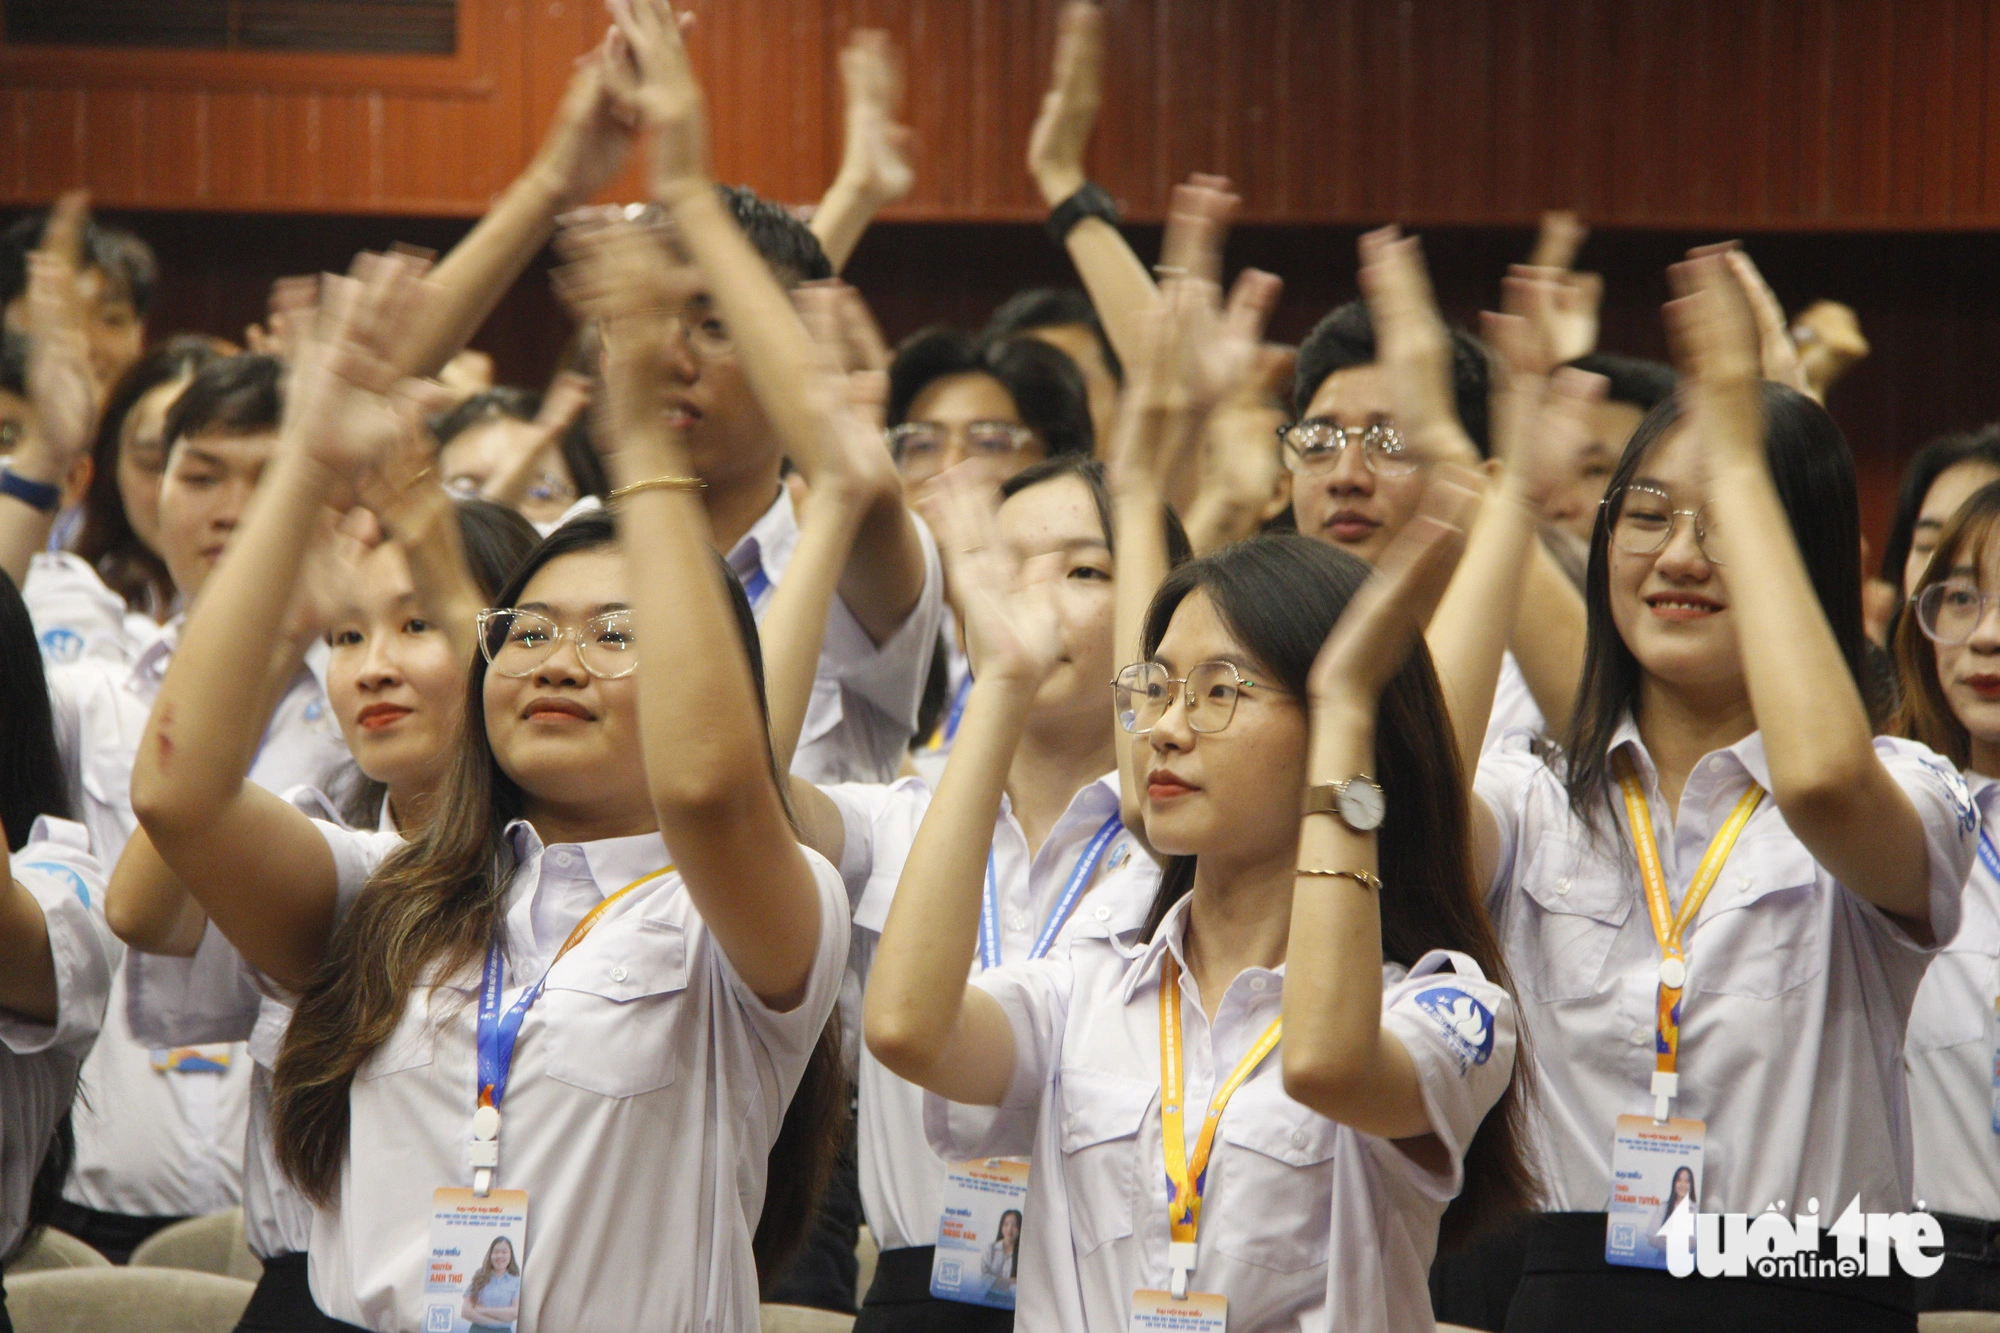 459 official delegates representing more than 600,000 officials, members and students of Ho Chi Minh City attended the 7th Congress of the Vietnamese Student Union of Ho Chi Minh City - Photo: CONG TRIEU